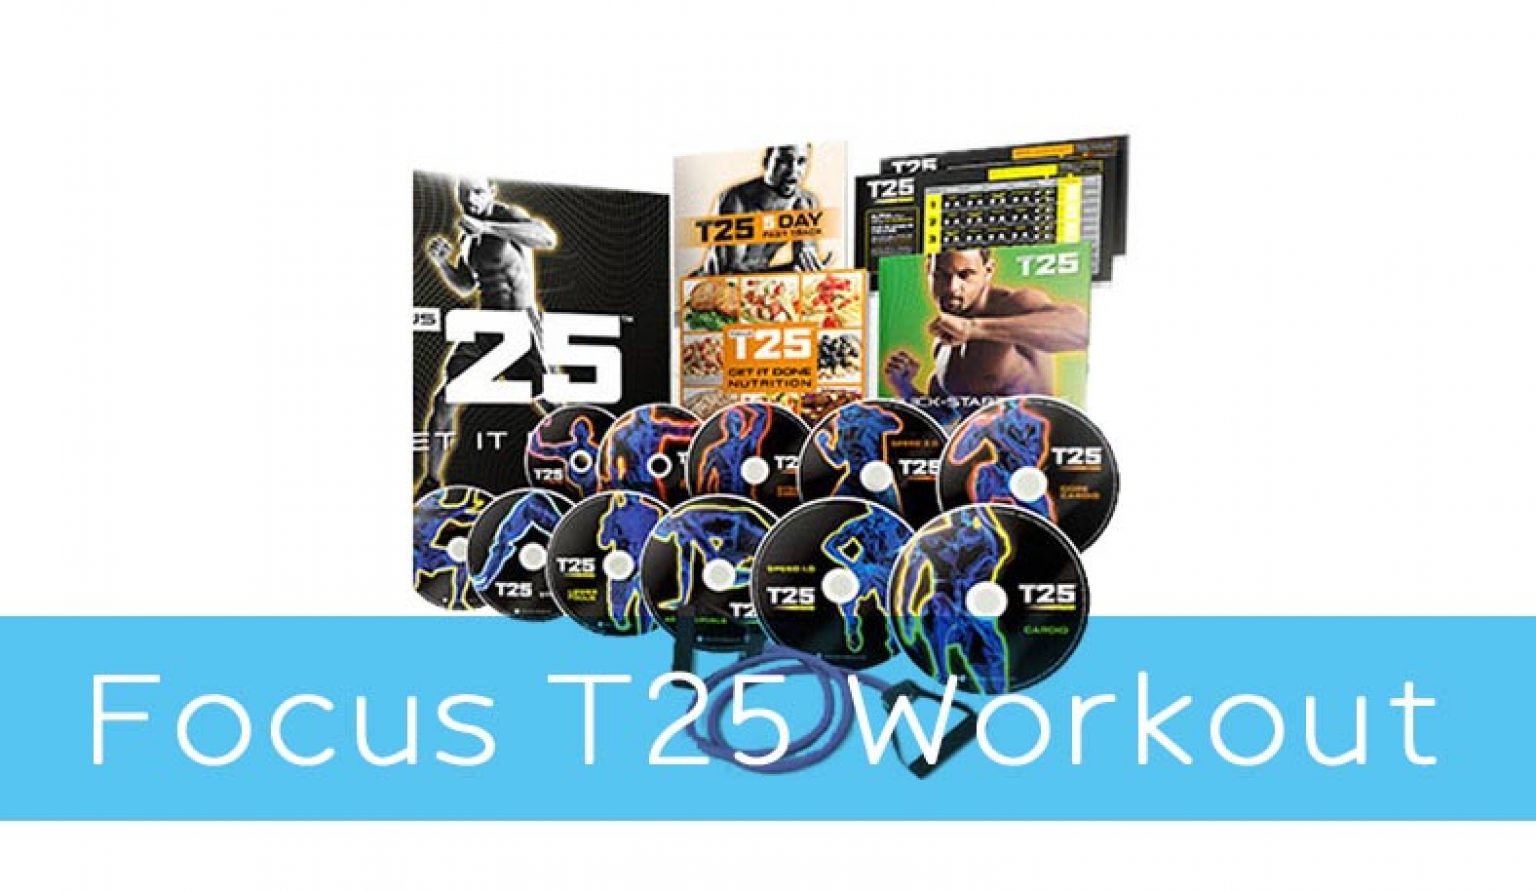 focus t25 alpha total body circuit full workout